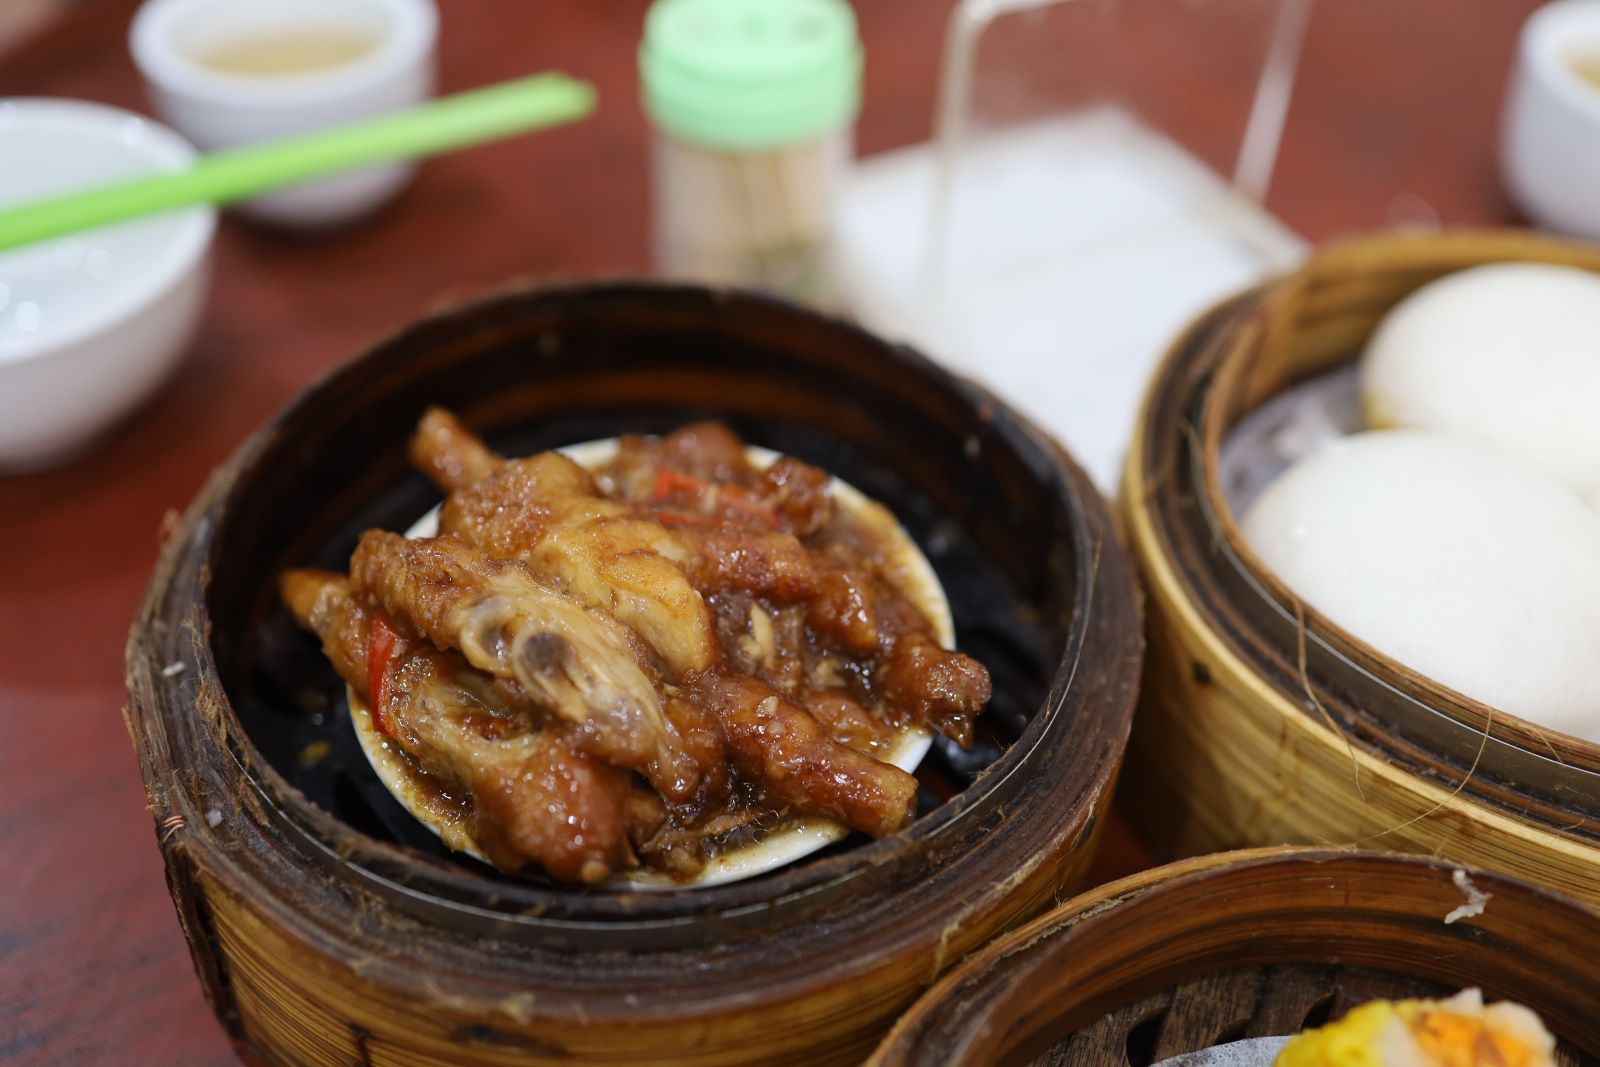 Chicken feet (鳳爪) - completely soak up the sauce